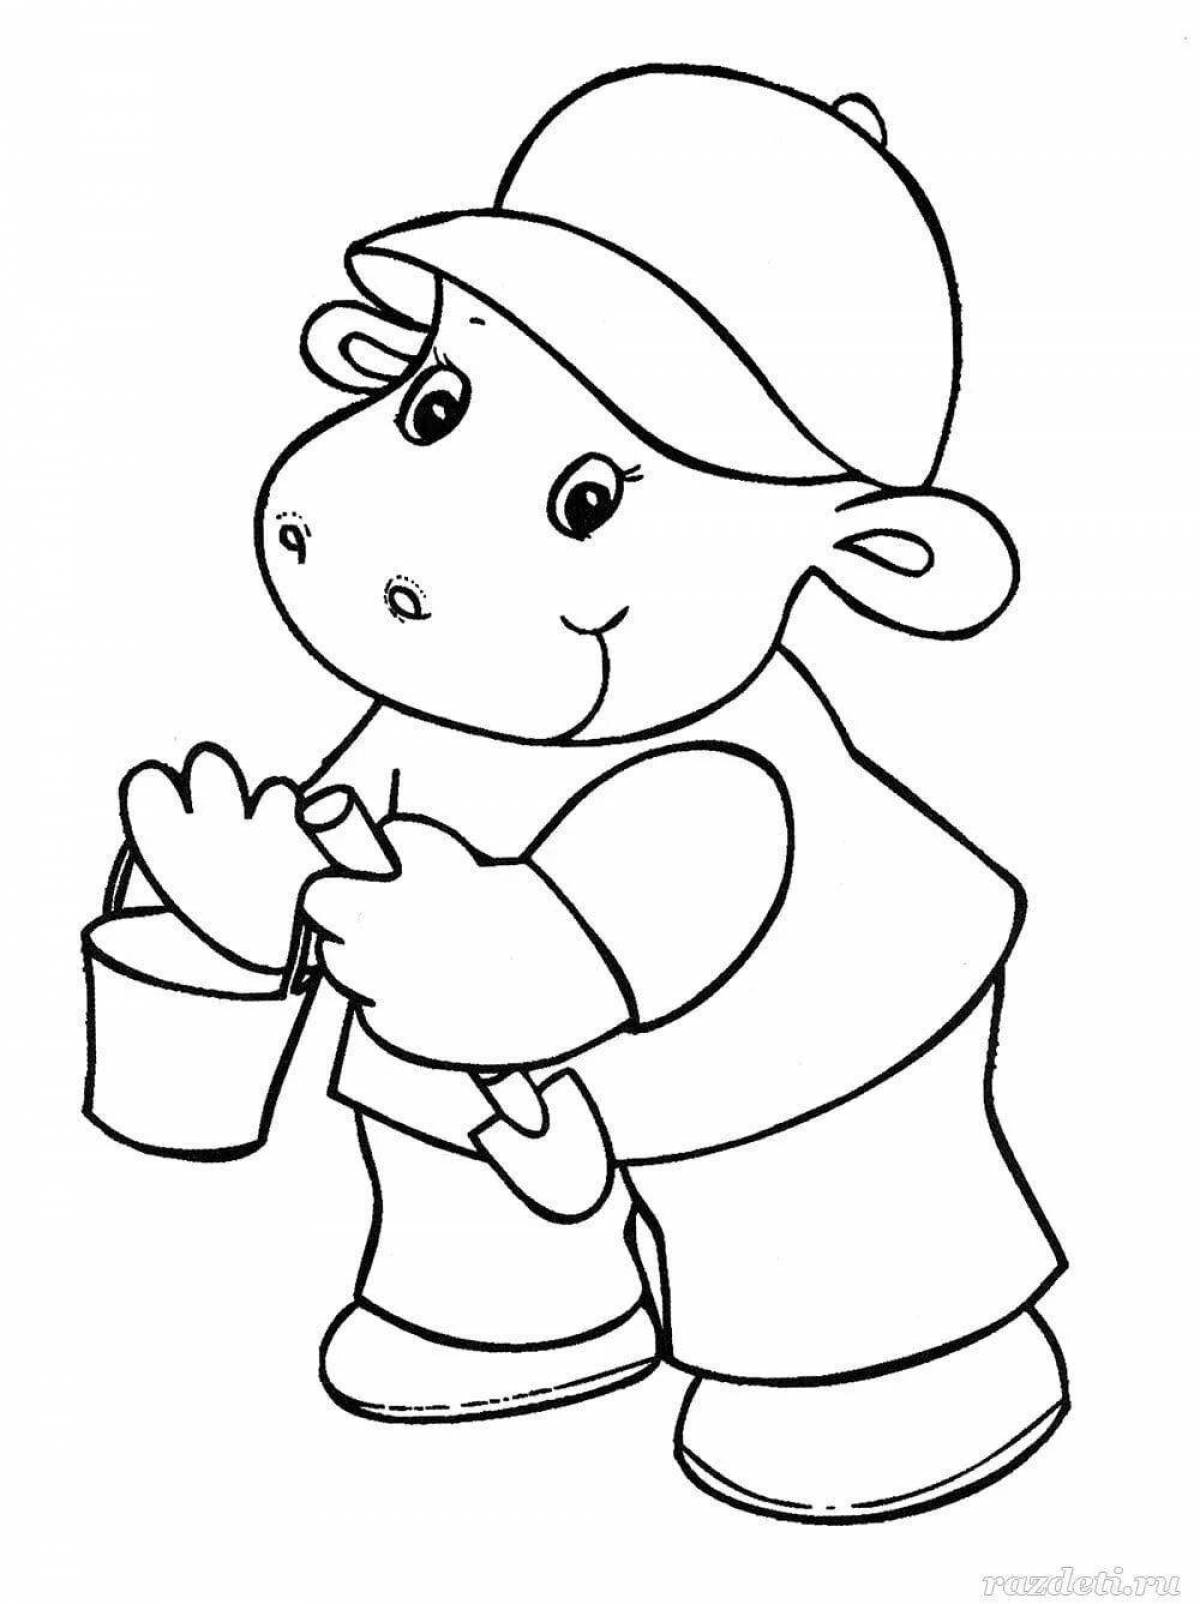 Color-frenzy coloring page kindergarten for 5 years